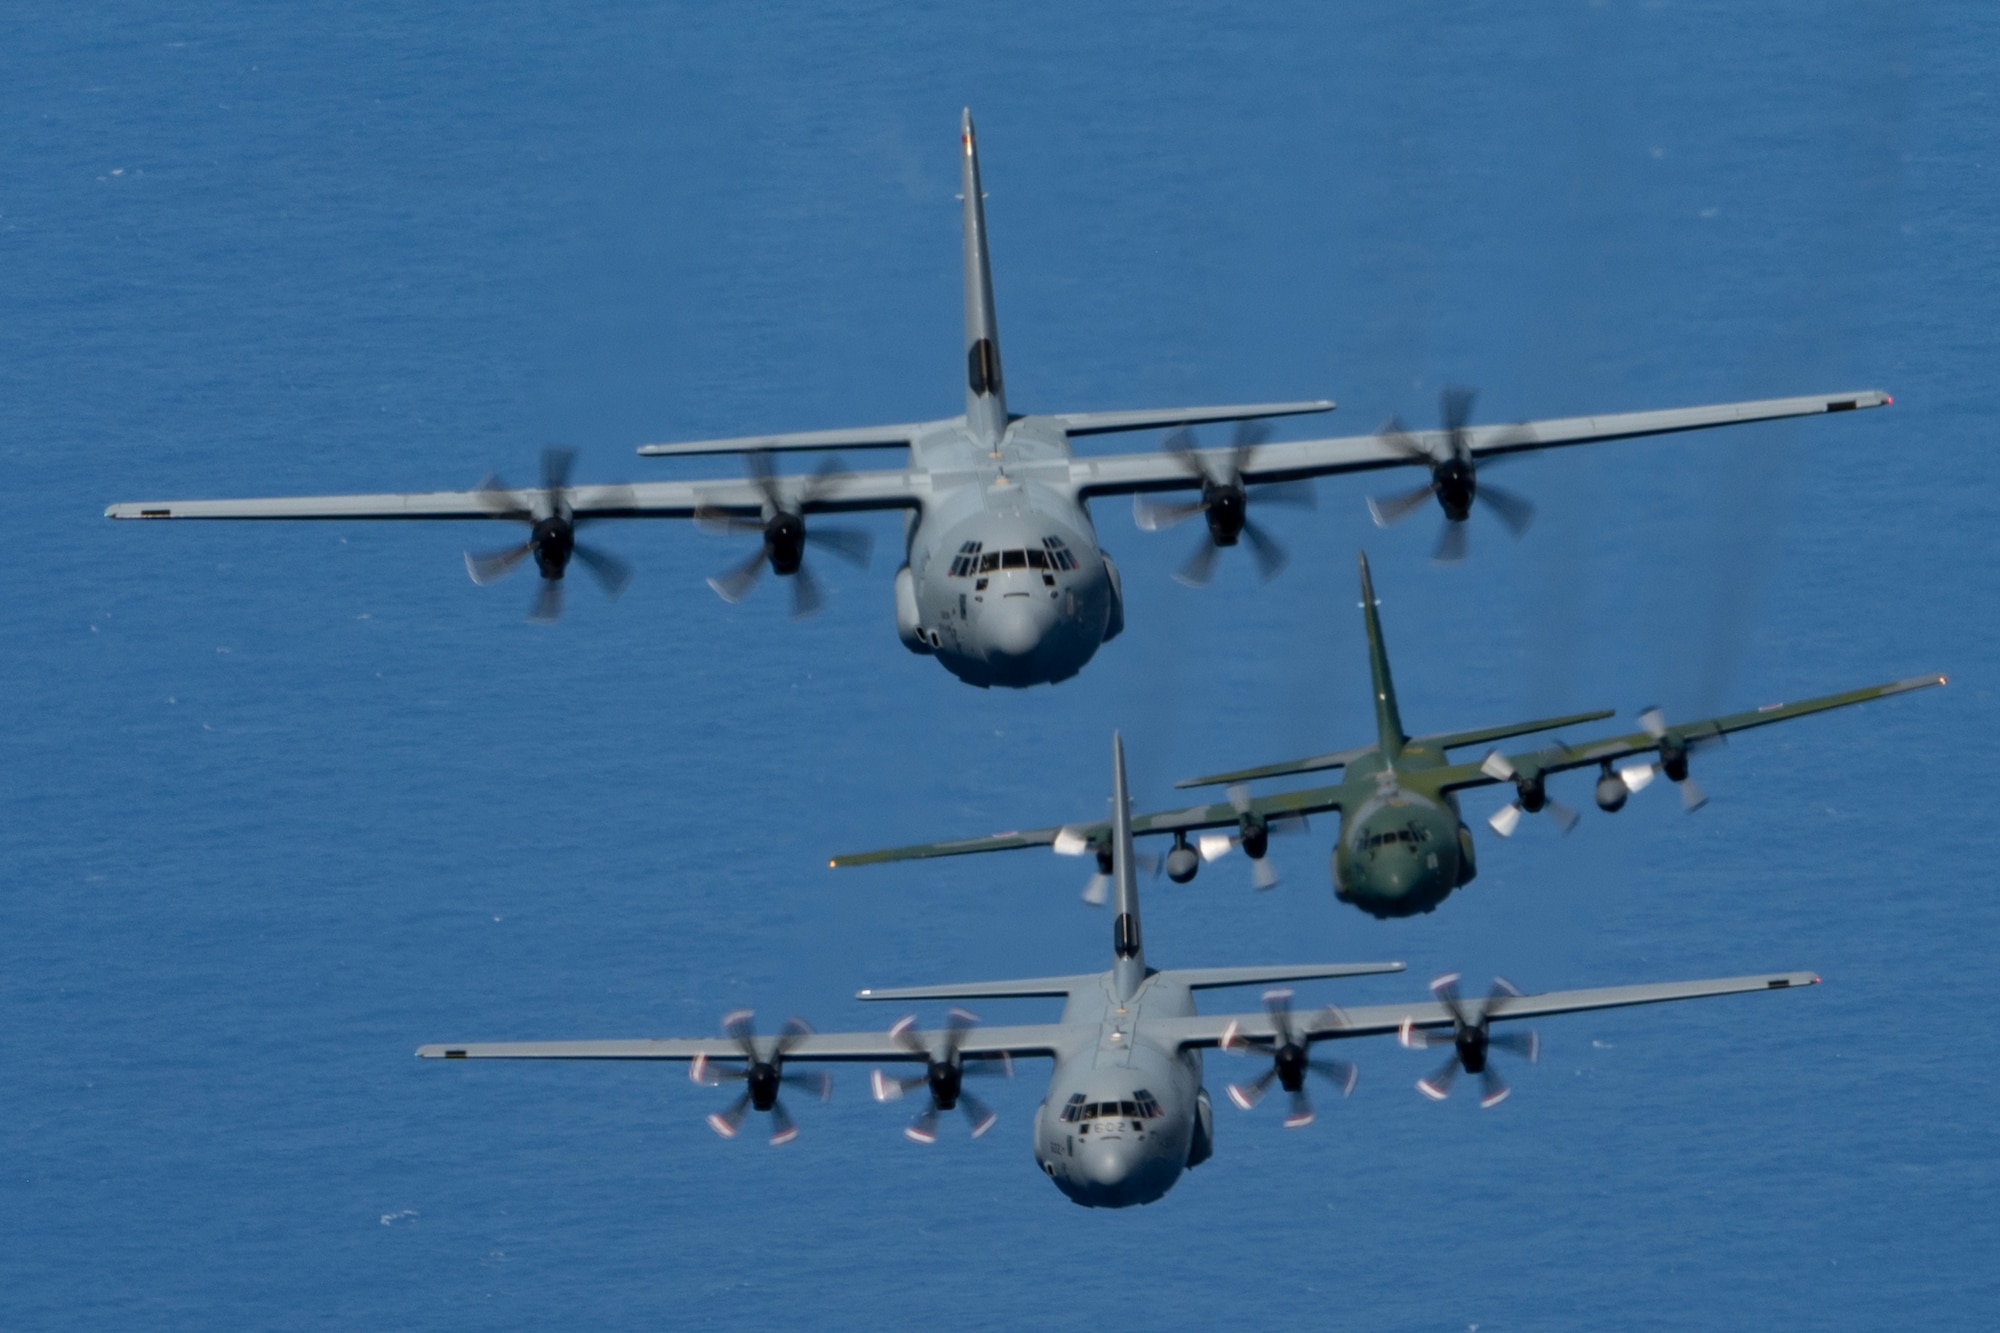 Photo of Cargo aircraft from Japan, U.S., Canada, and the Republic of Korea flying together over the Pacific.